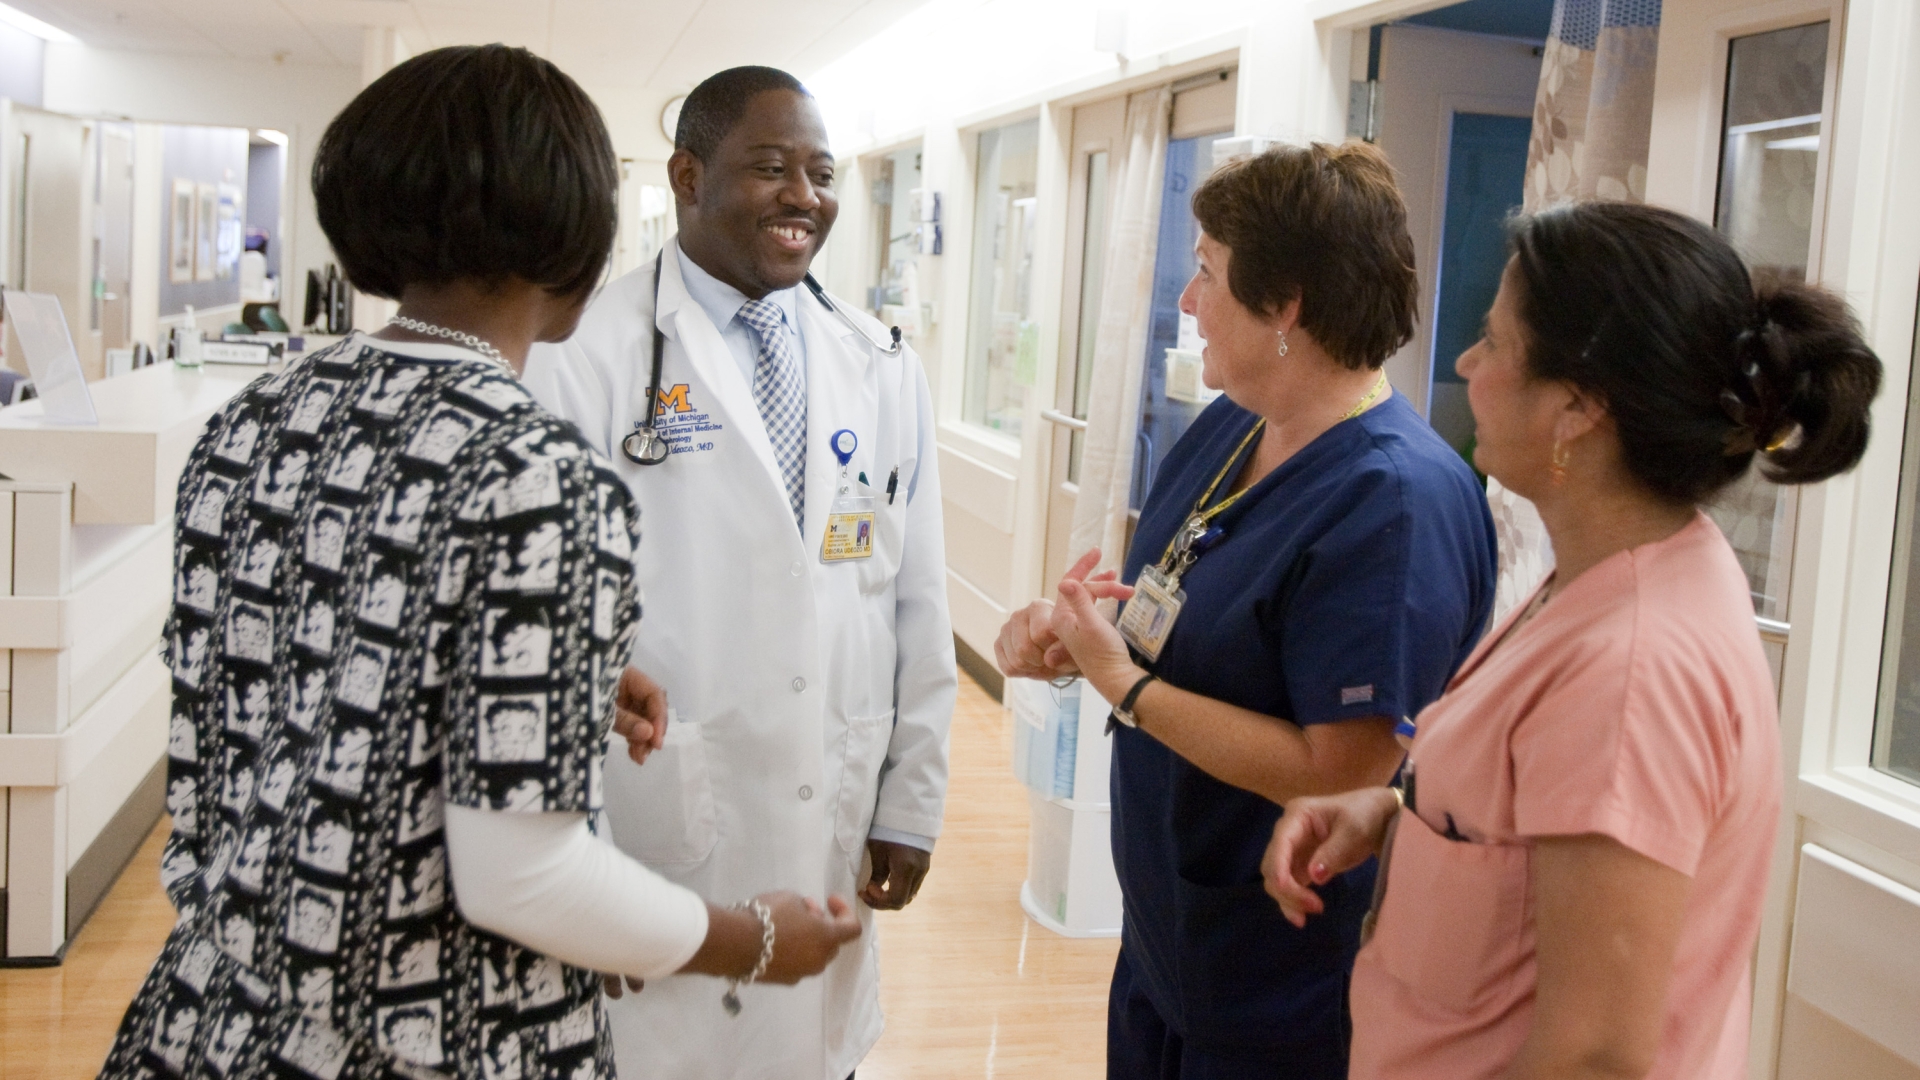 Black male doctor wearing white coat talking in hospital hallway to three diverse female medical professionals